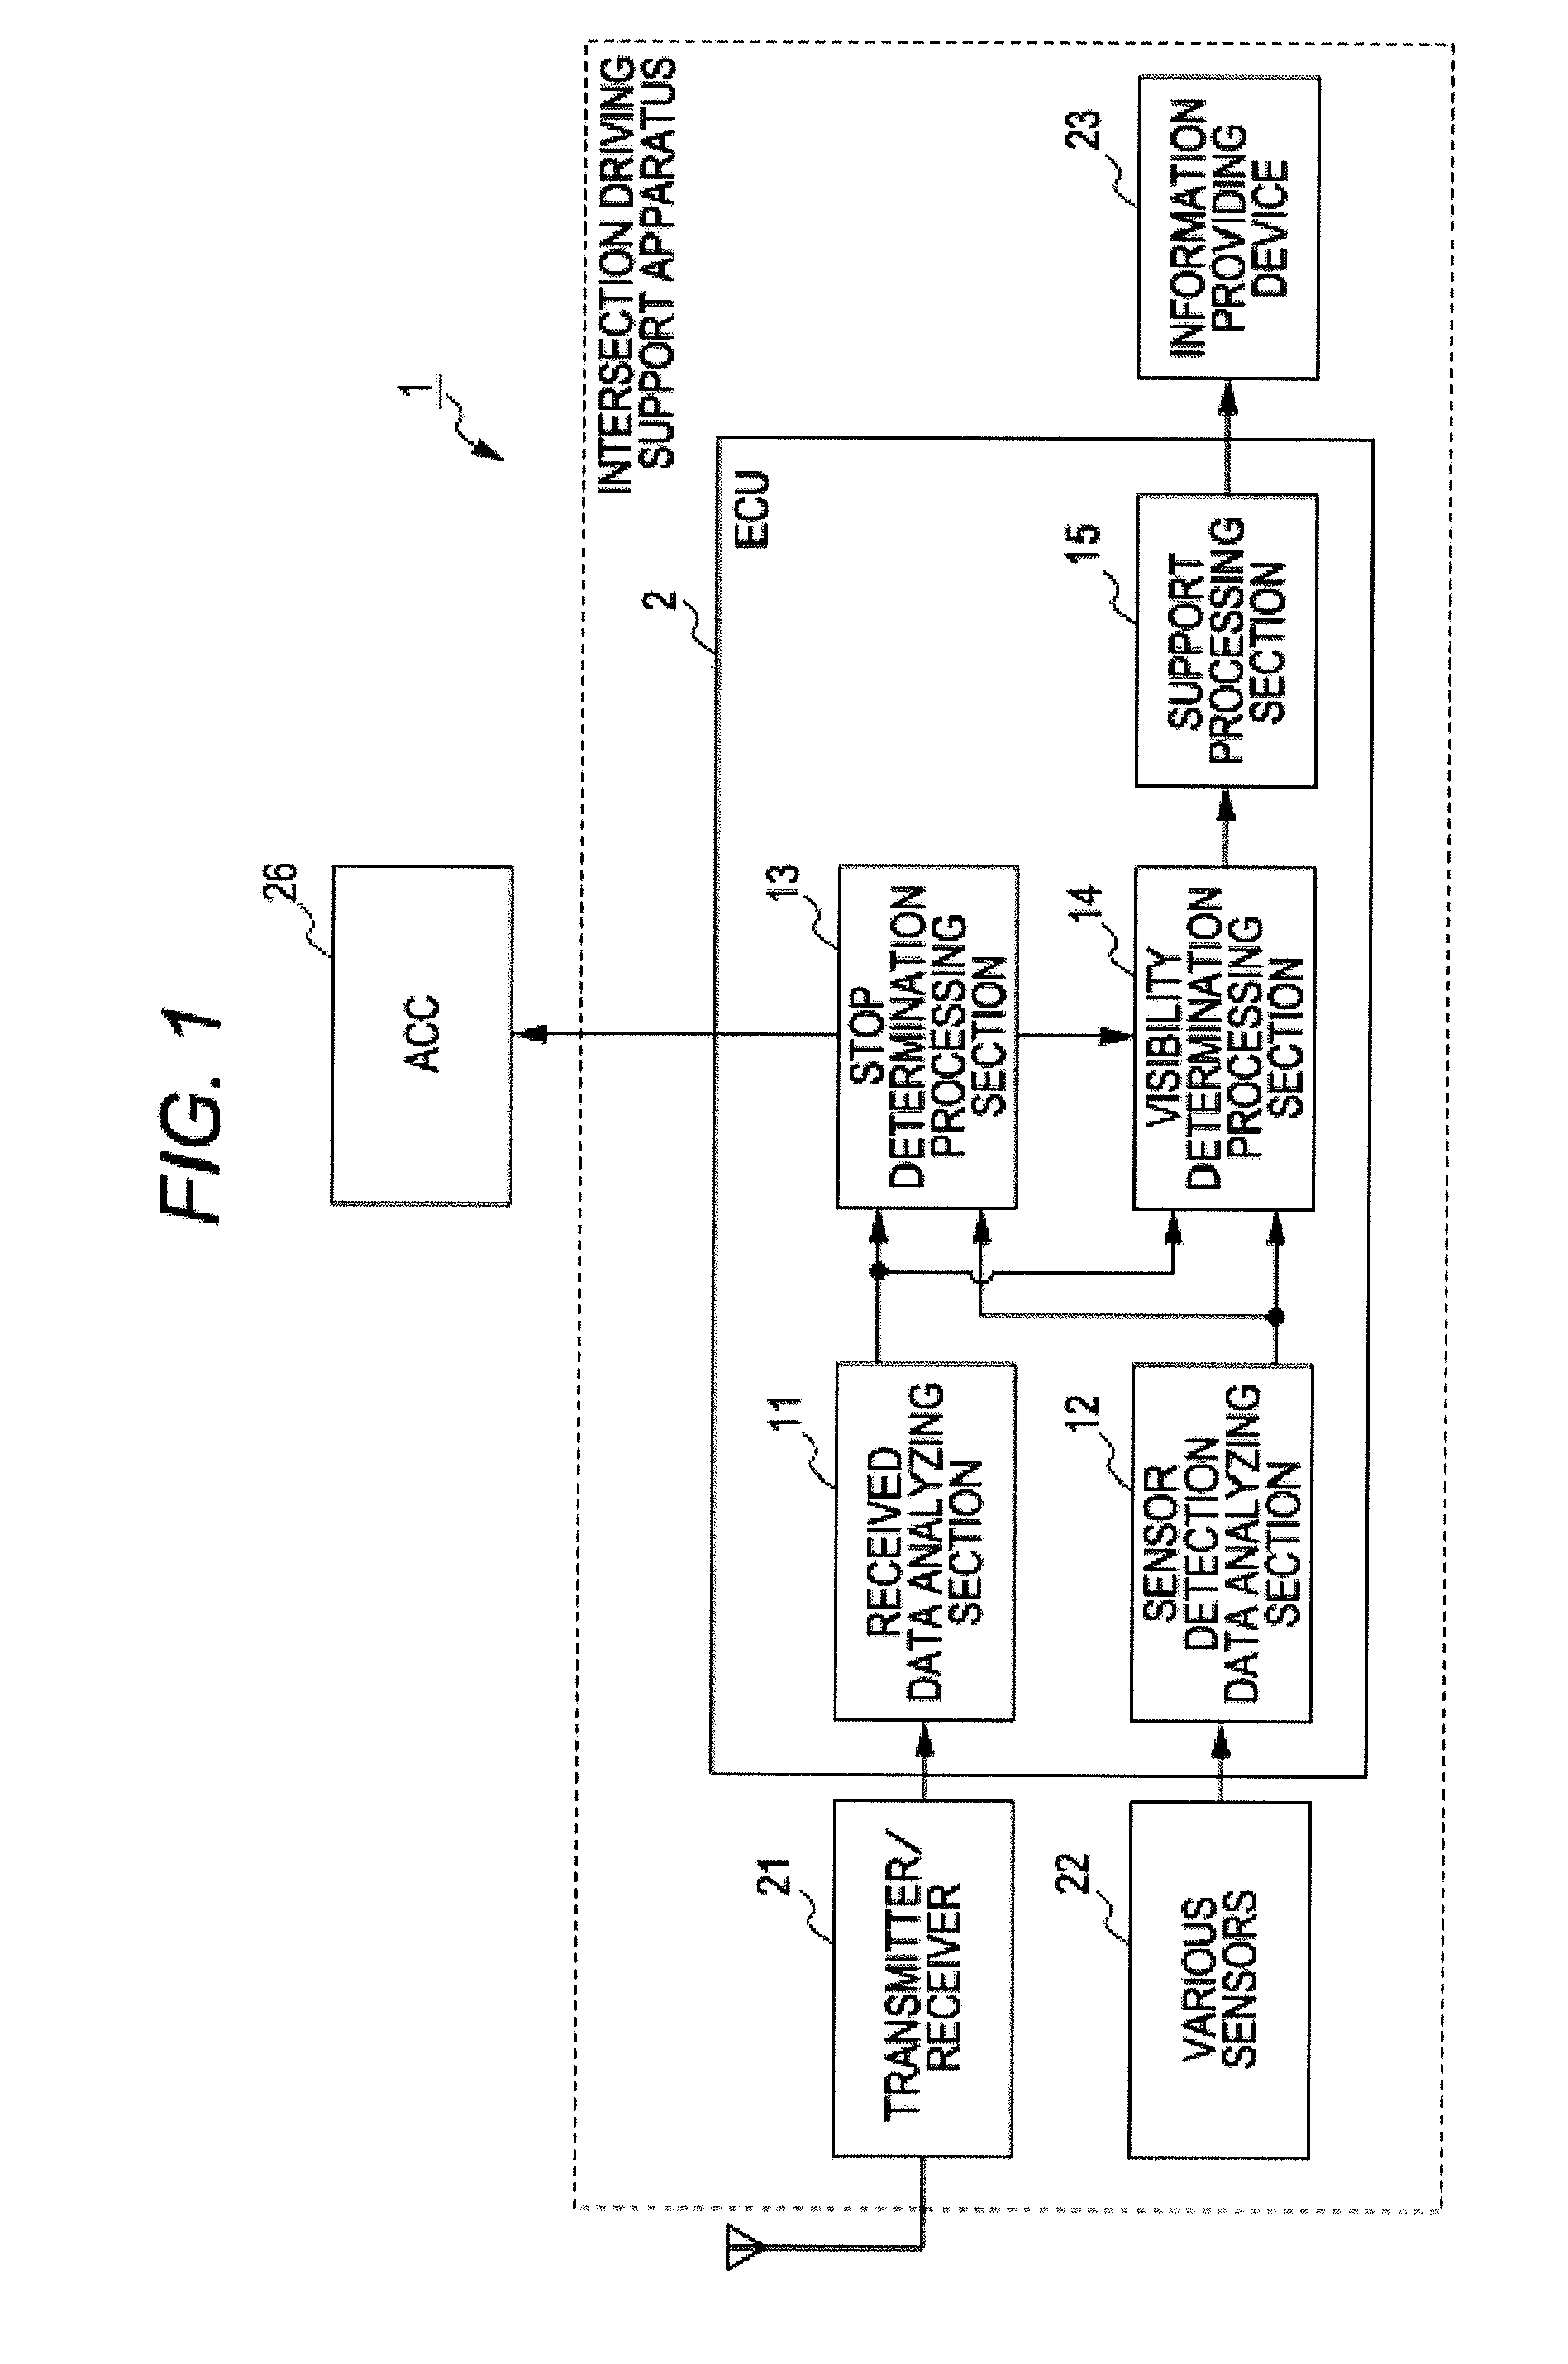 Intersection driving support apparatus